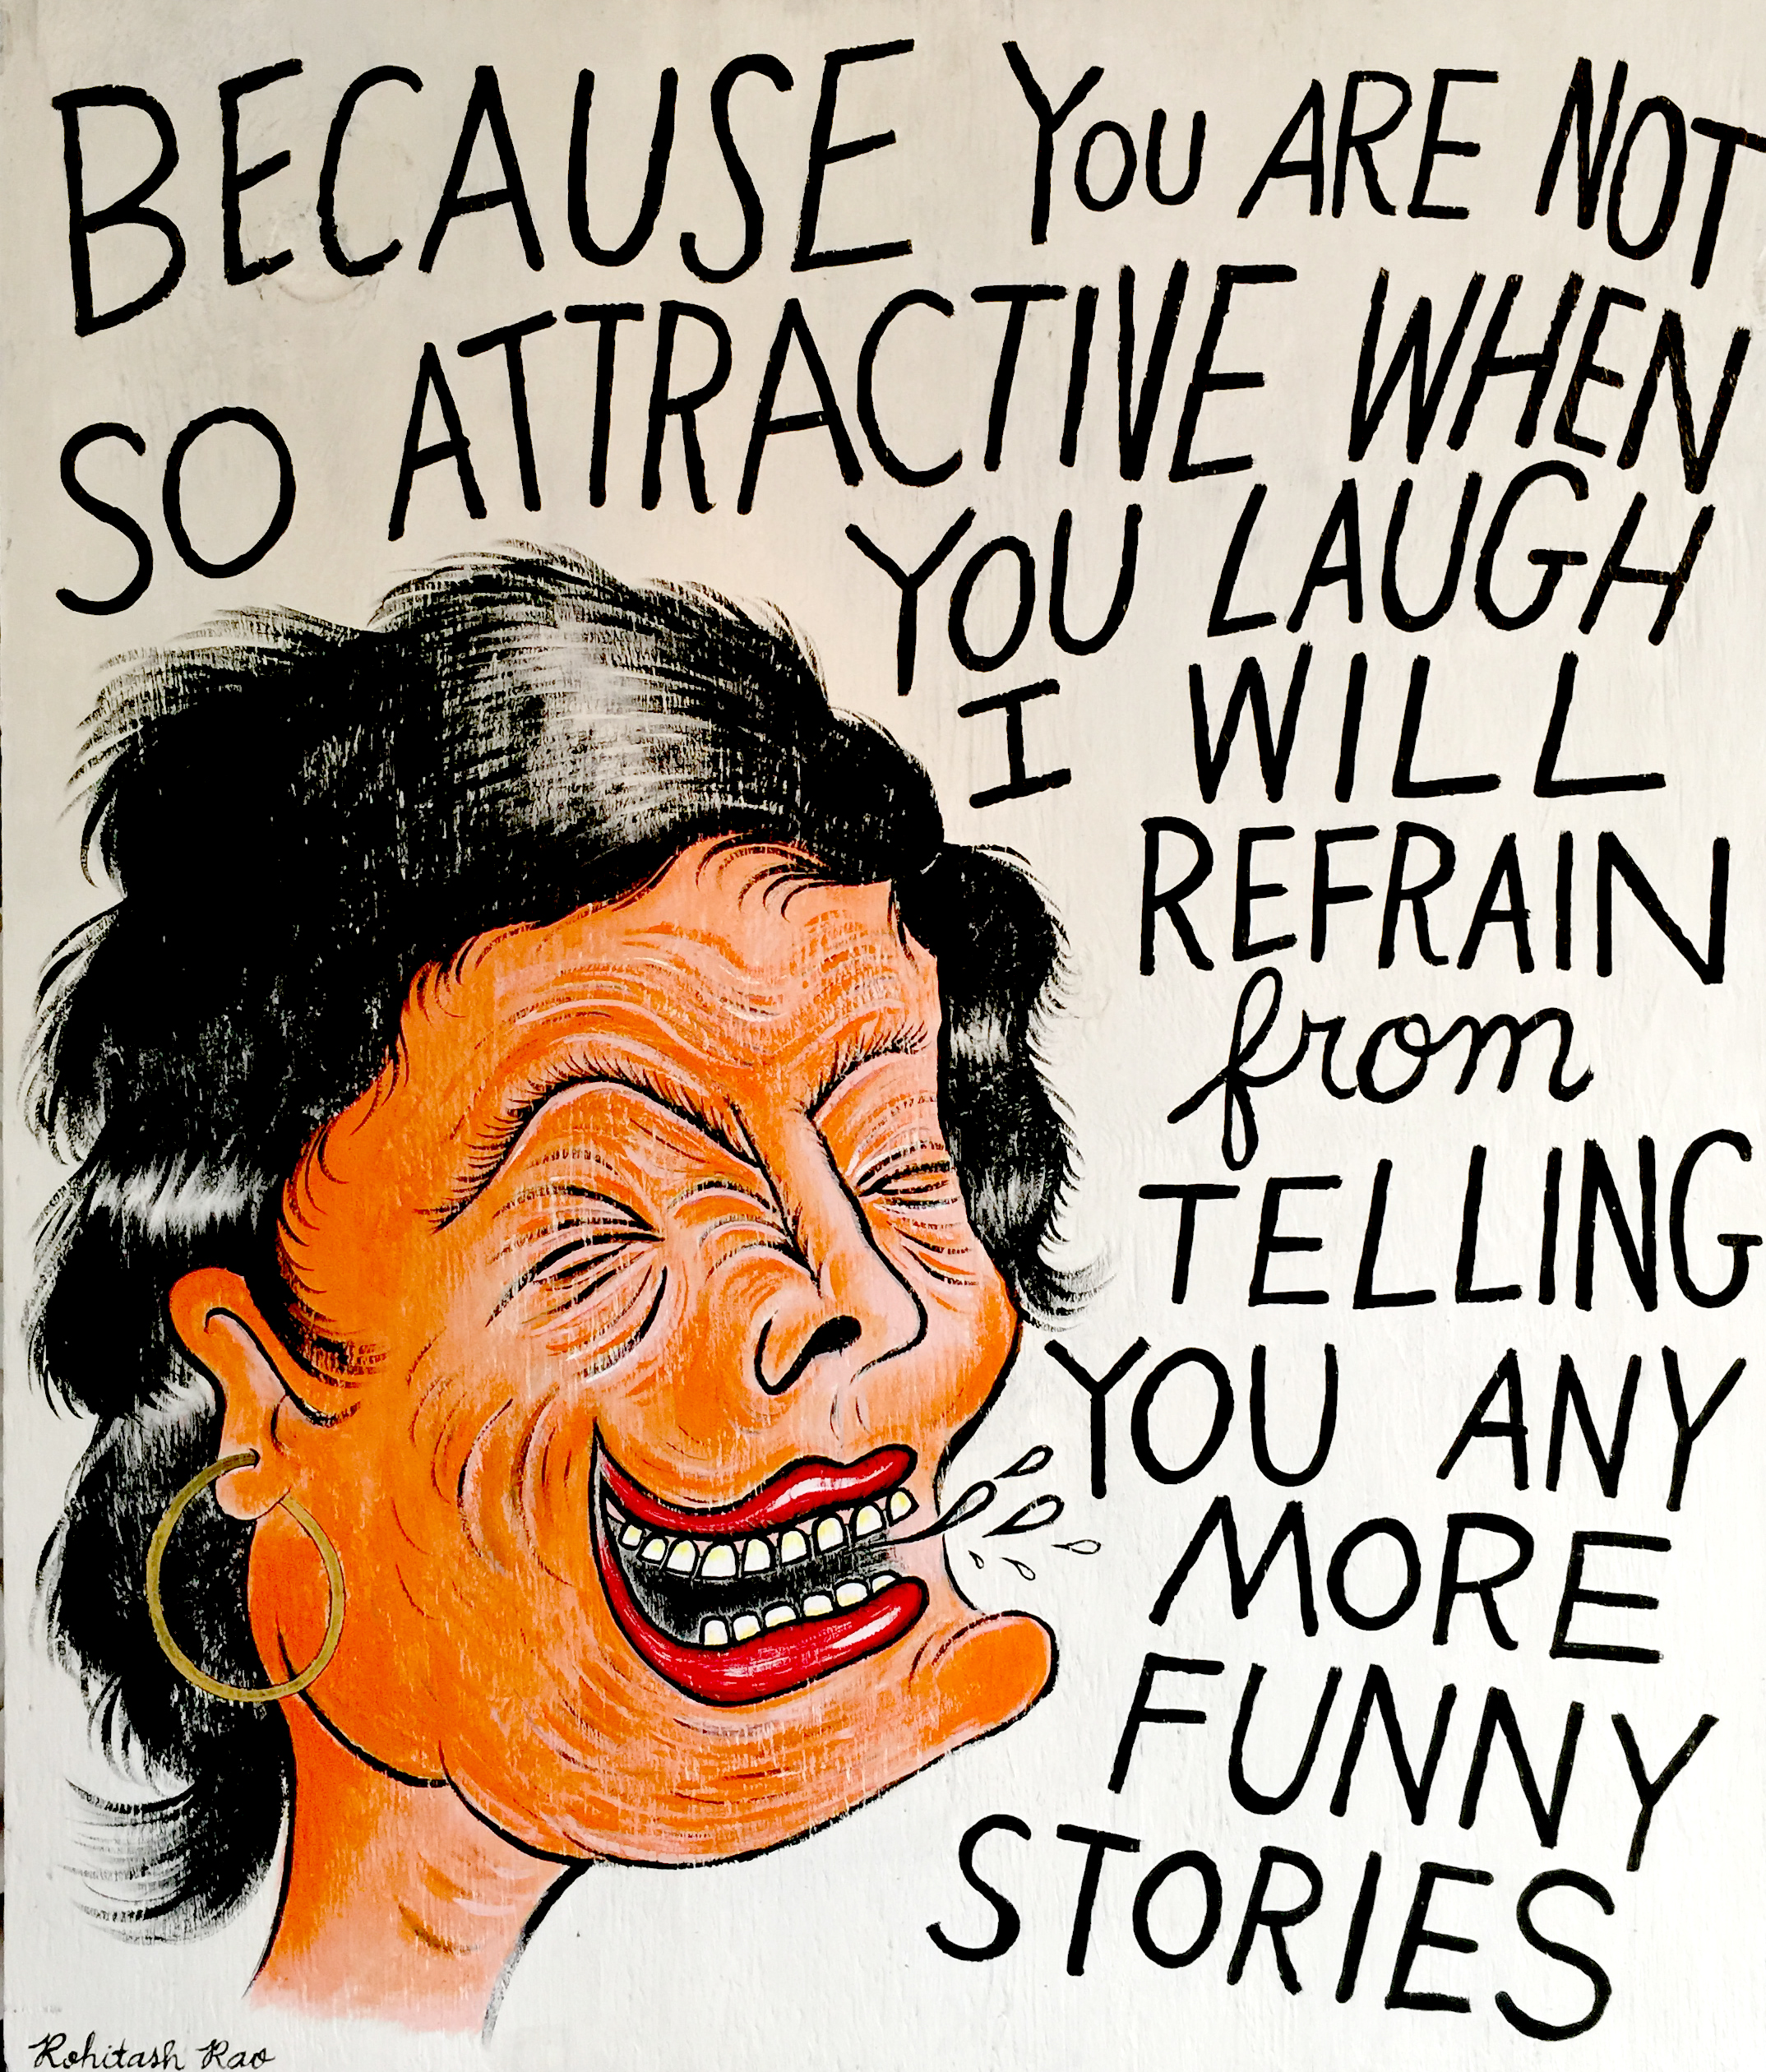 BECAUSE YOU ARE NOT SO ATTRACTIVE WHEN YOU LAUGH